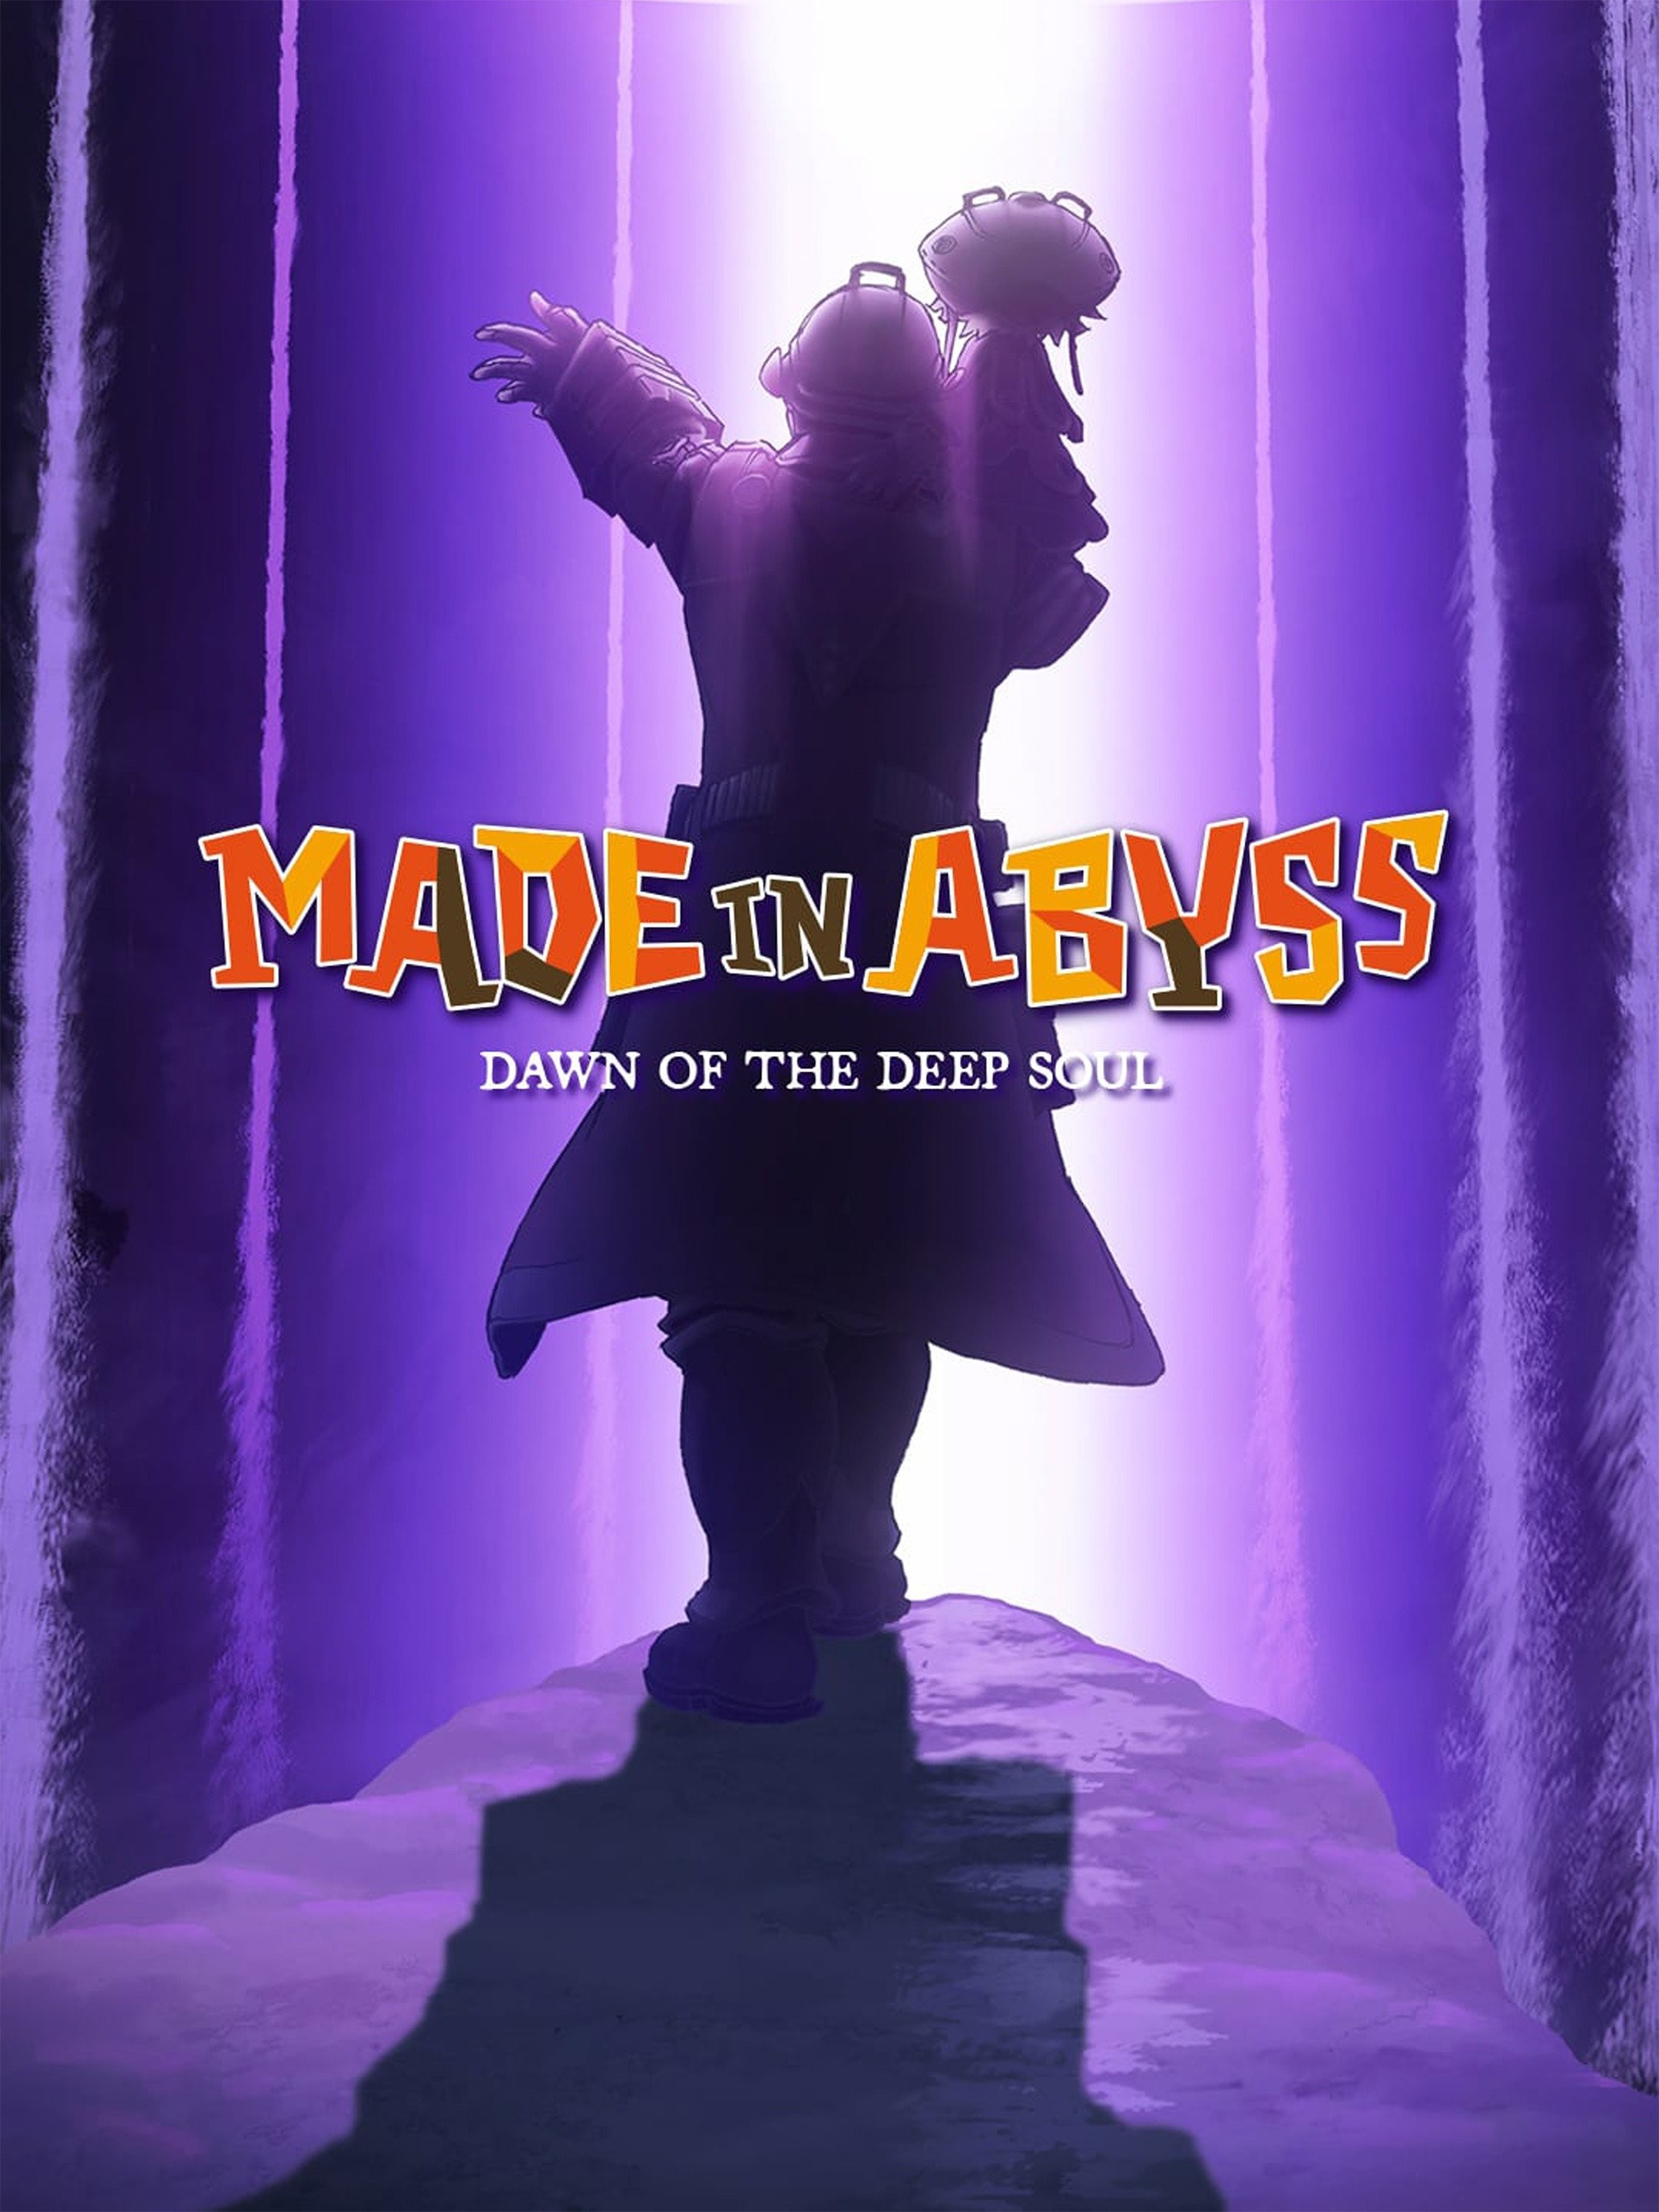 Made in Abyss: Dawn of the Deep Soul Gets Restricted Film Rating